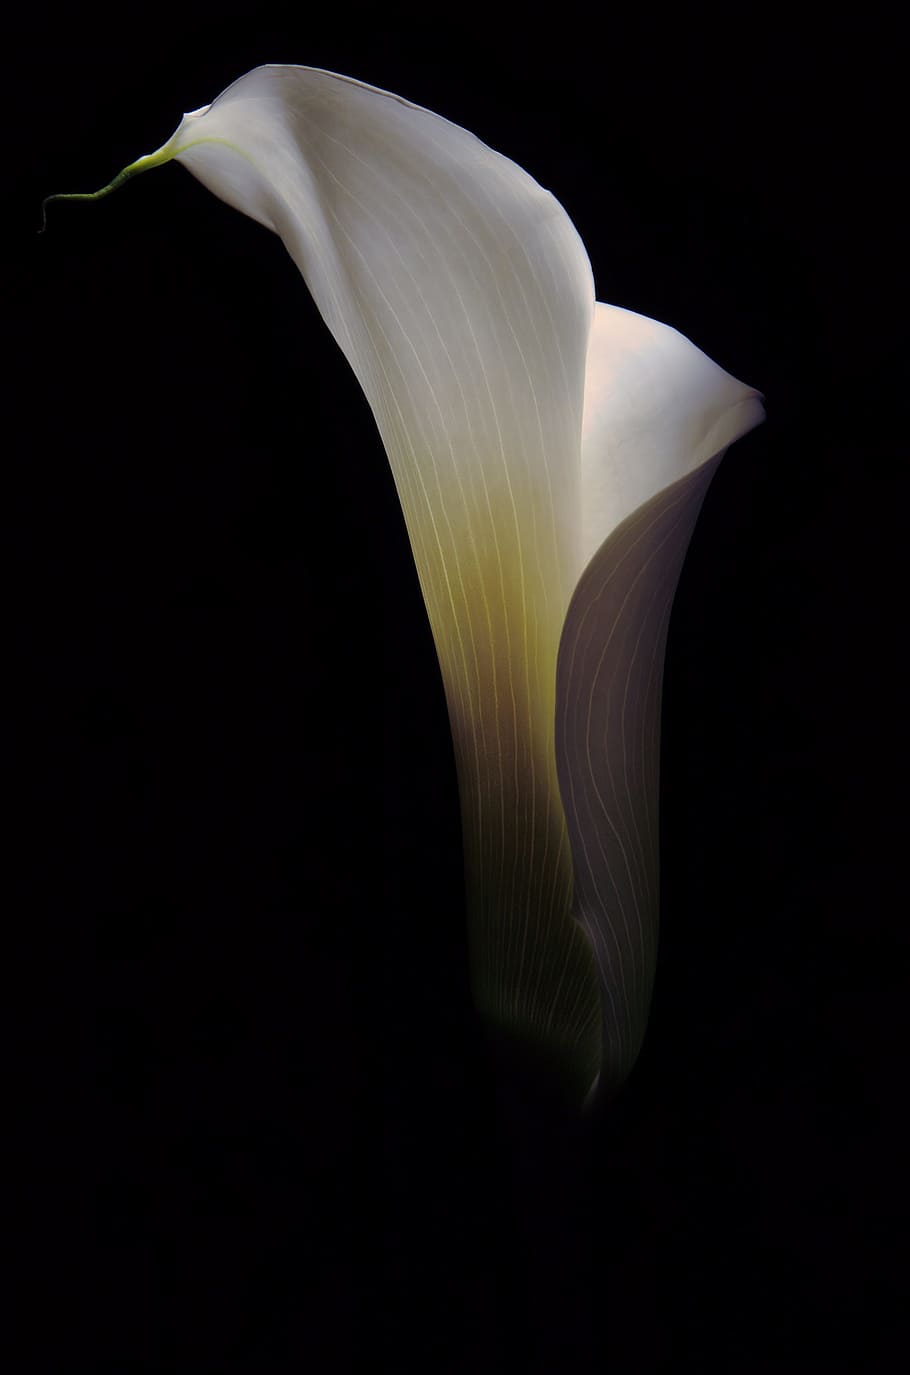 close-up photo, white, calla lily flower, flower, calla, floral, lily, botany, botanical, lilly